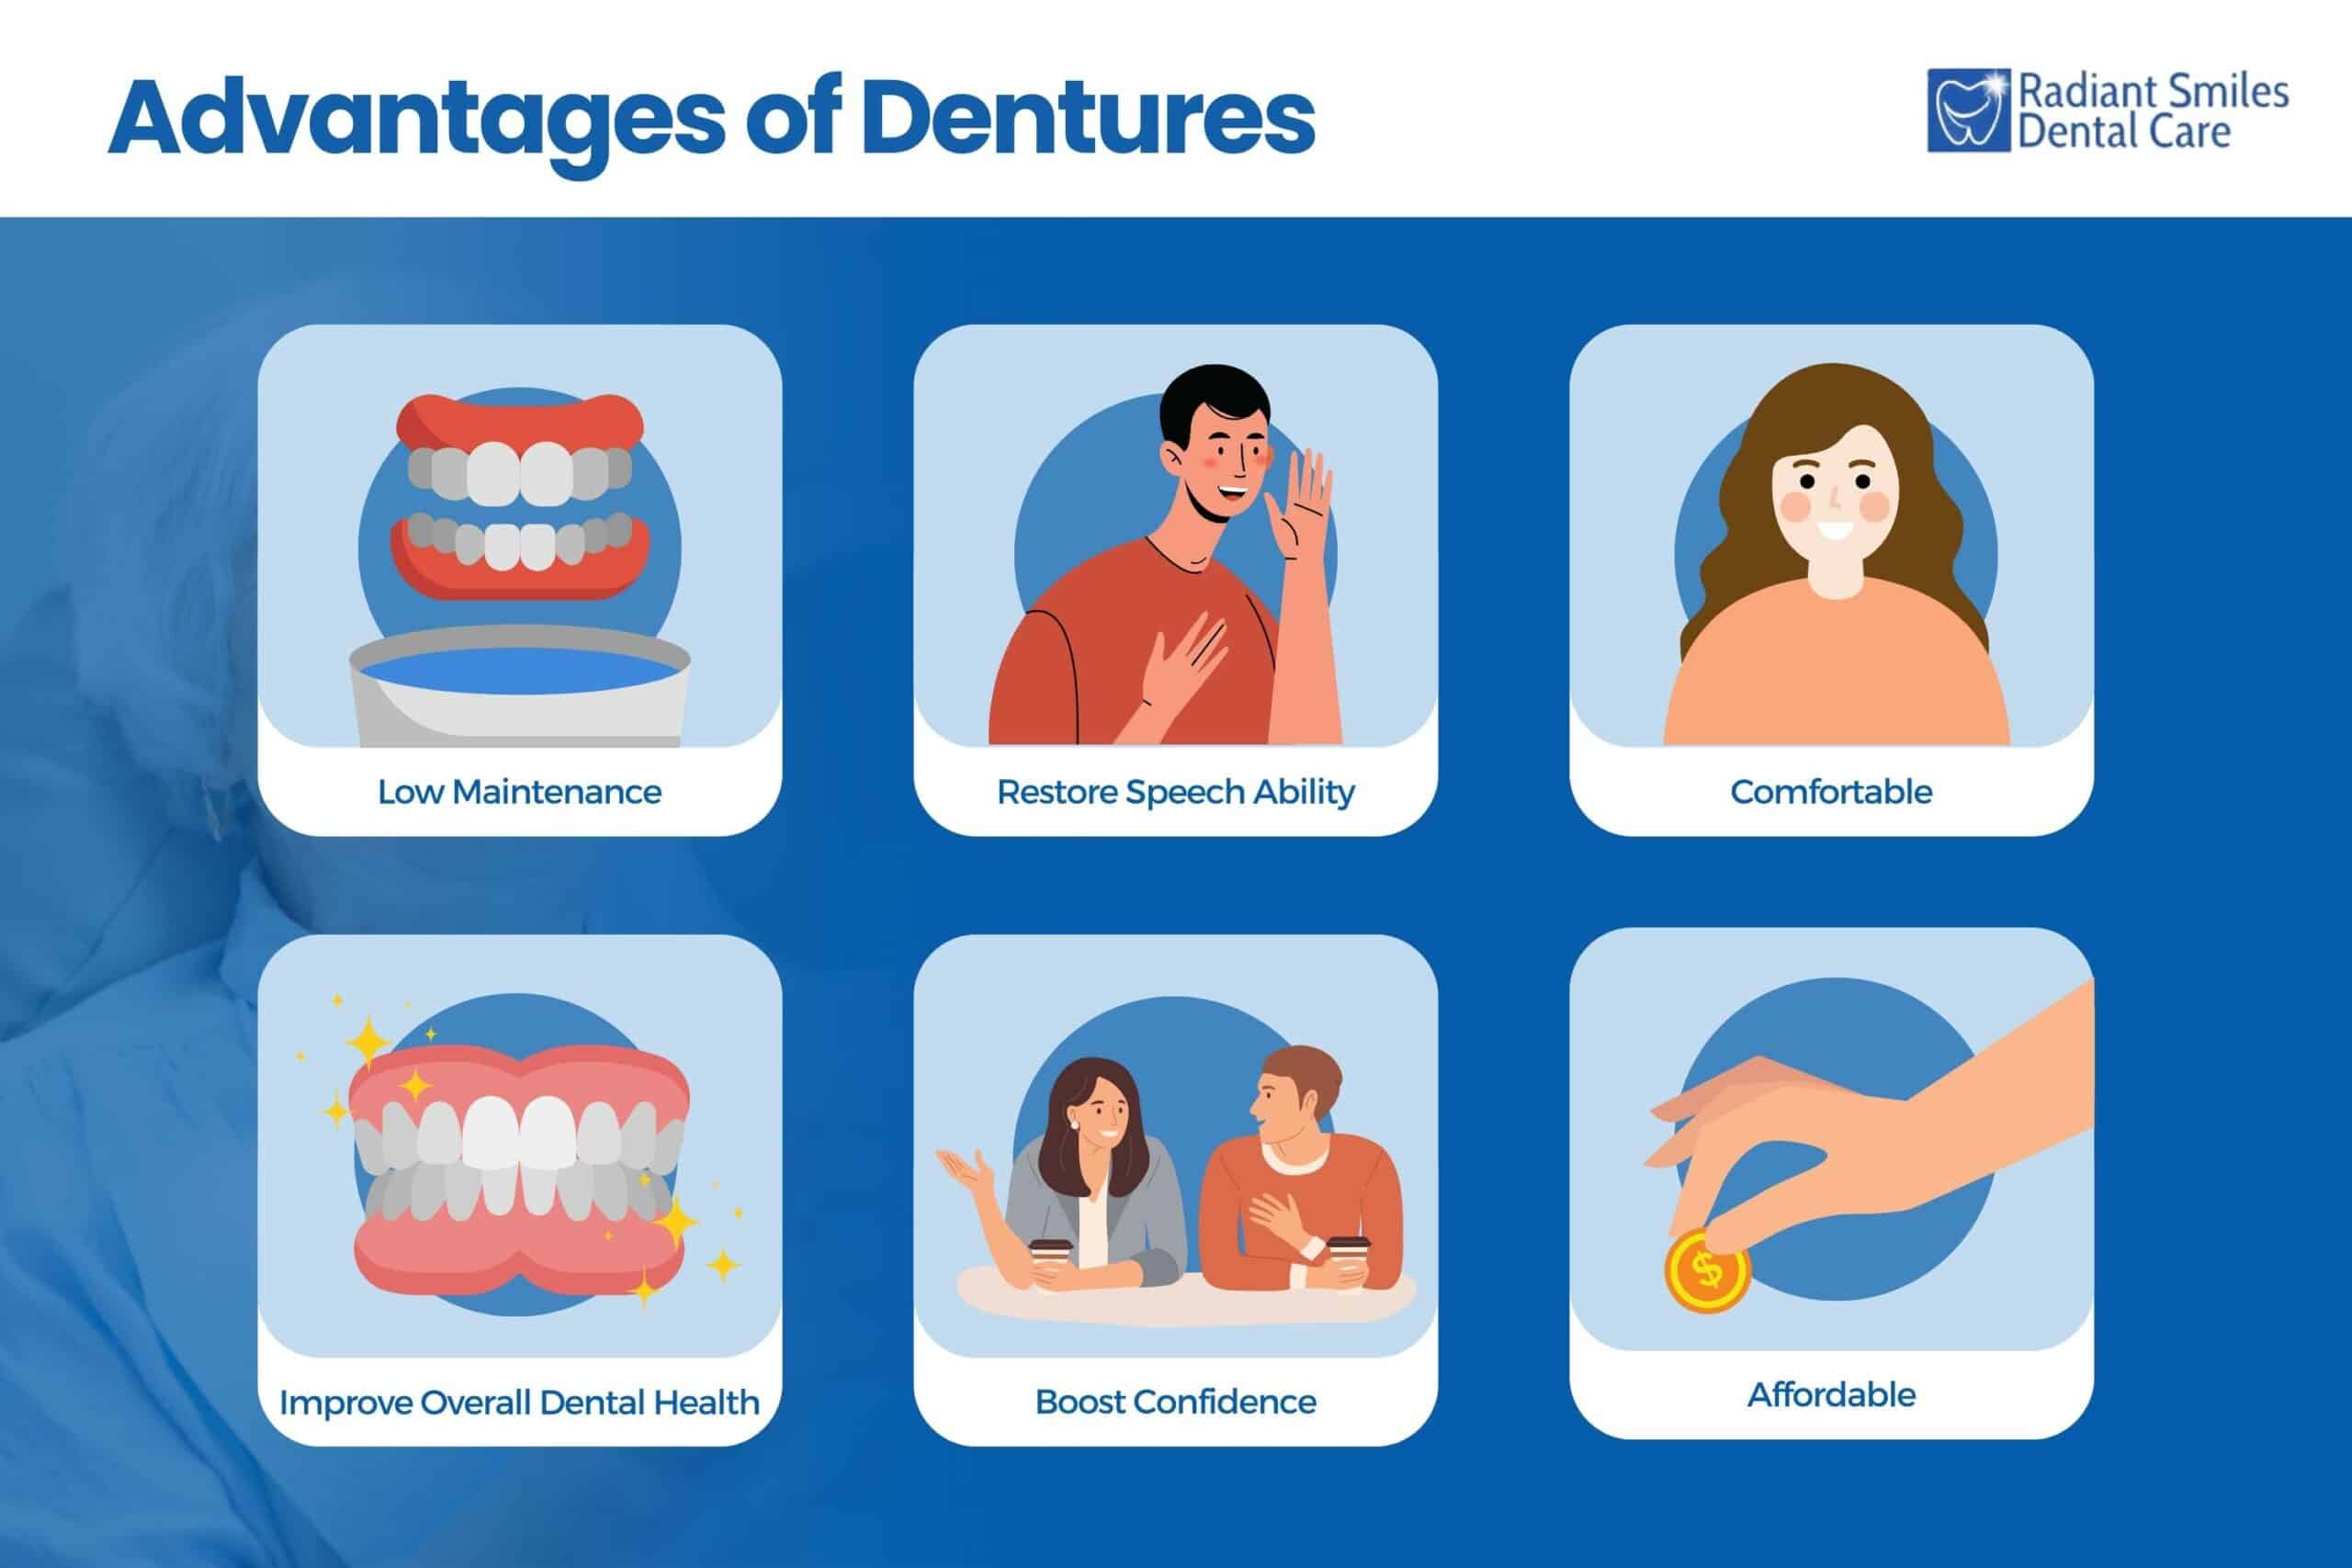 What Are the Advantages of Dentures